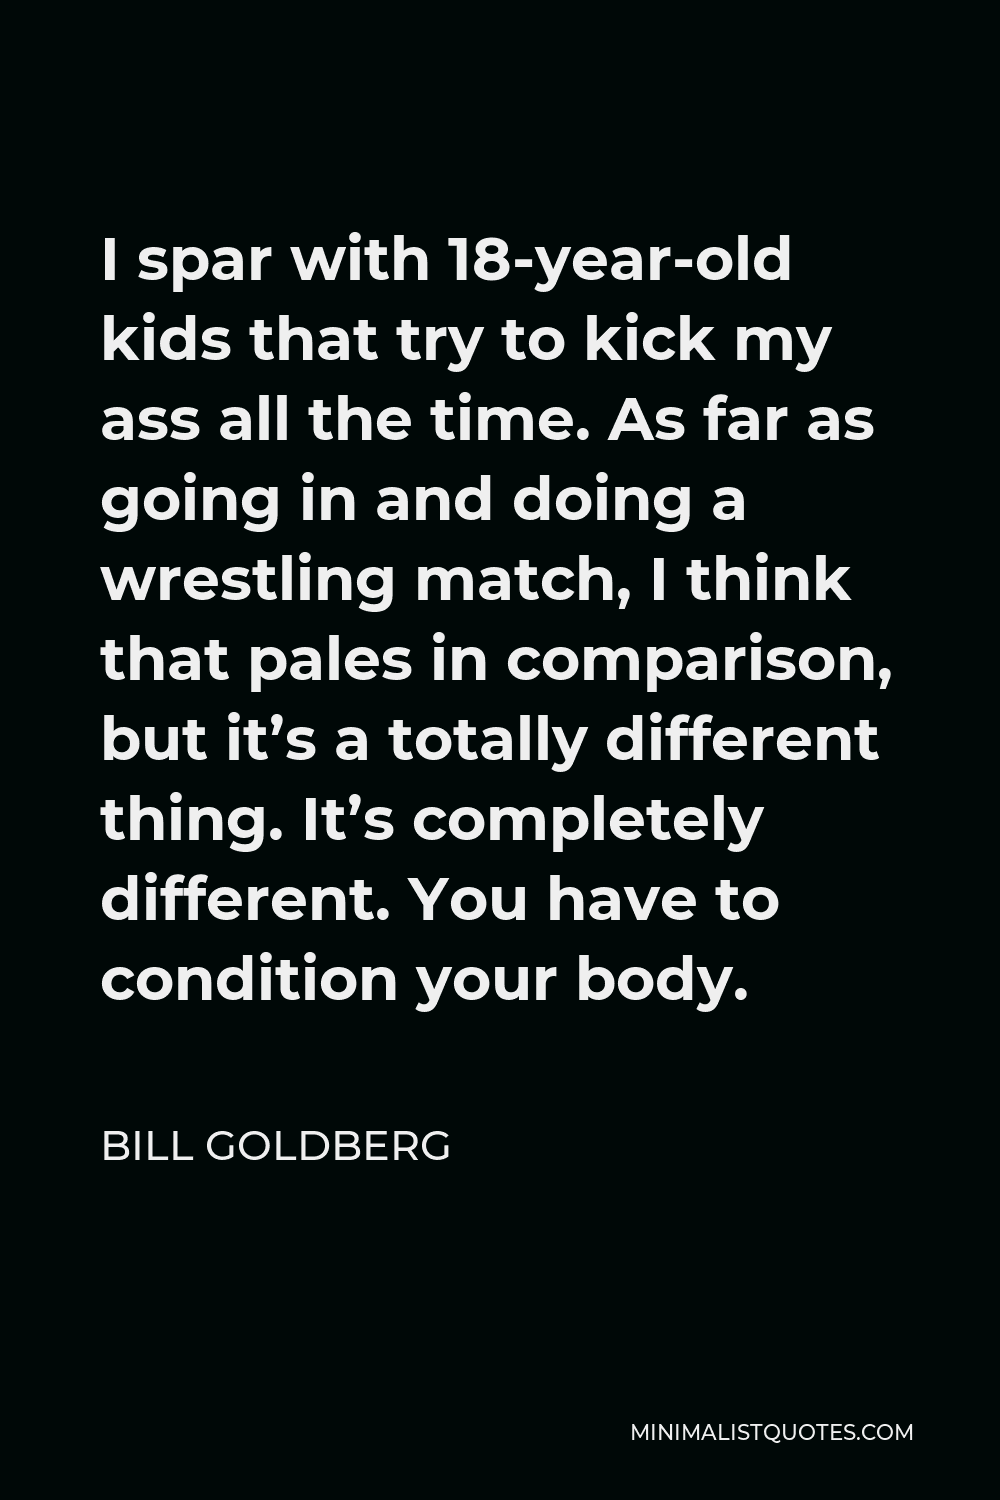 Bill Goldberg Quote - I spar with 18-year-old kids that try to kick my ass all the time. As far as going in and doing a wrestling match, I think that pales in comparison, but it’s a totally different thing. It’s completely different. You have to condition your body.